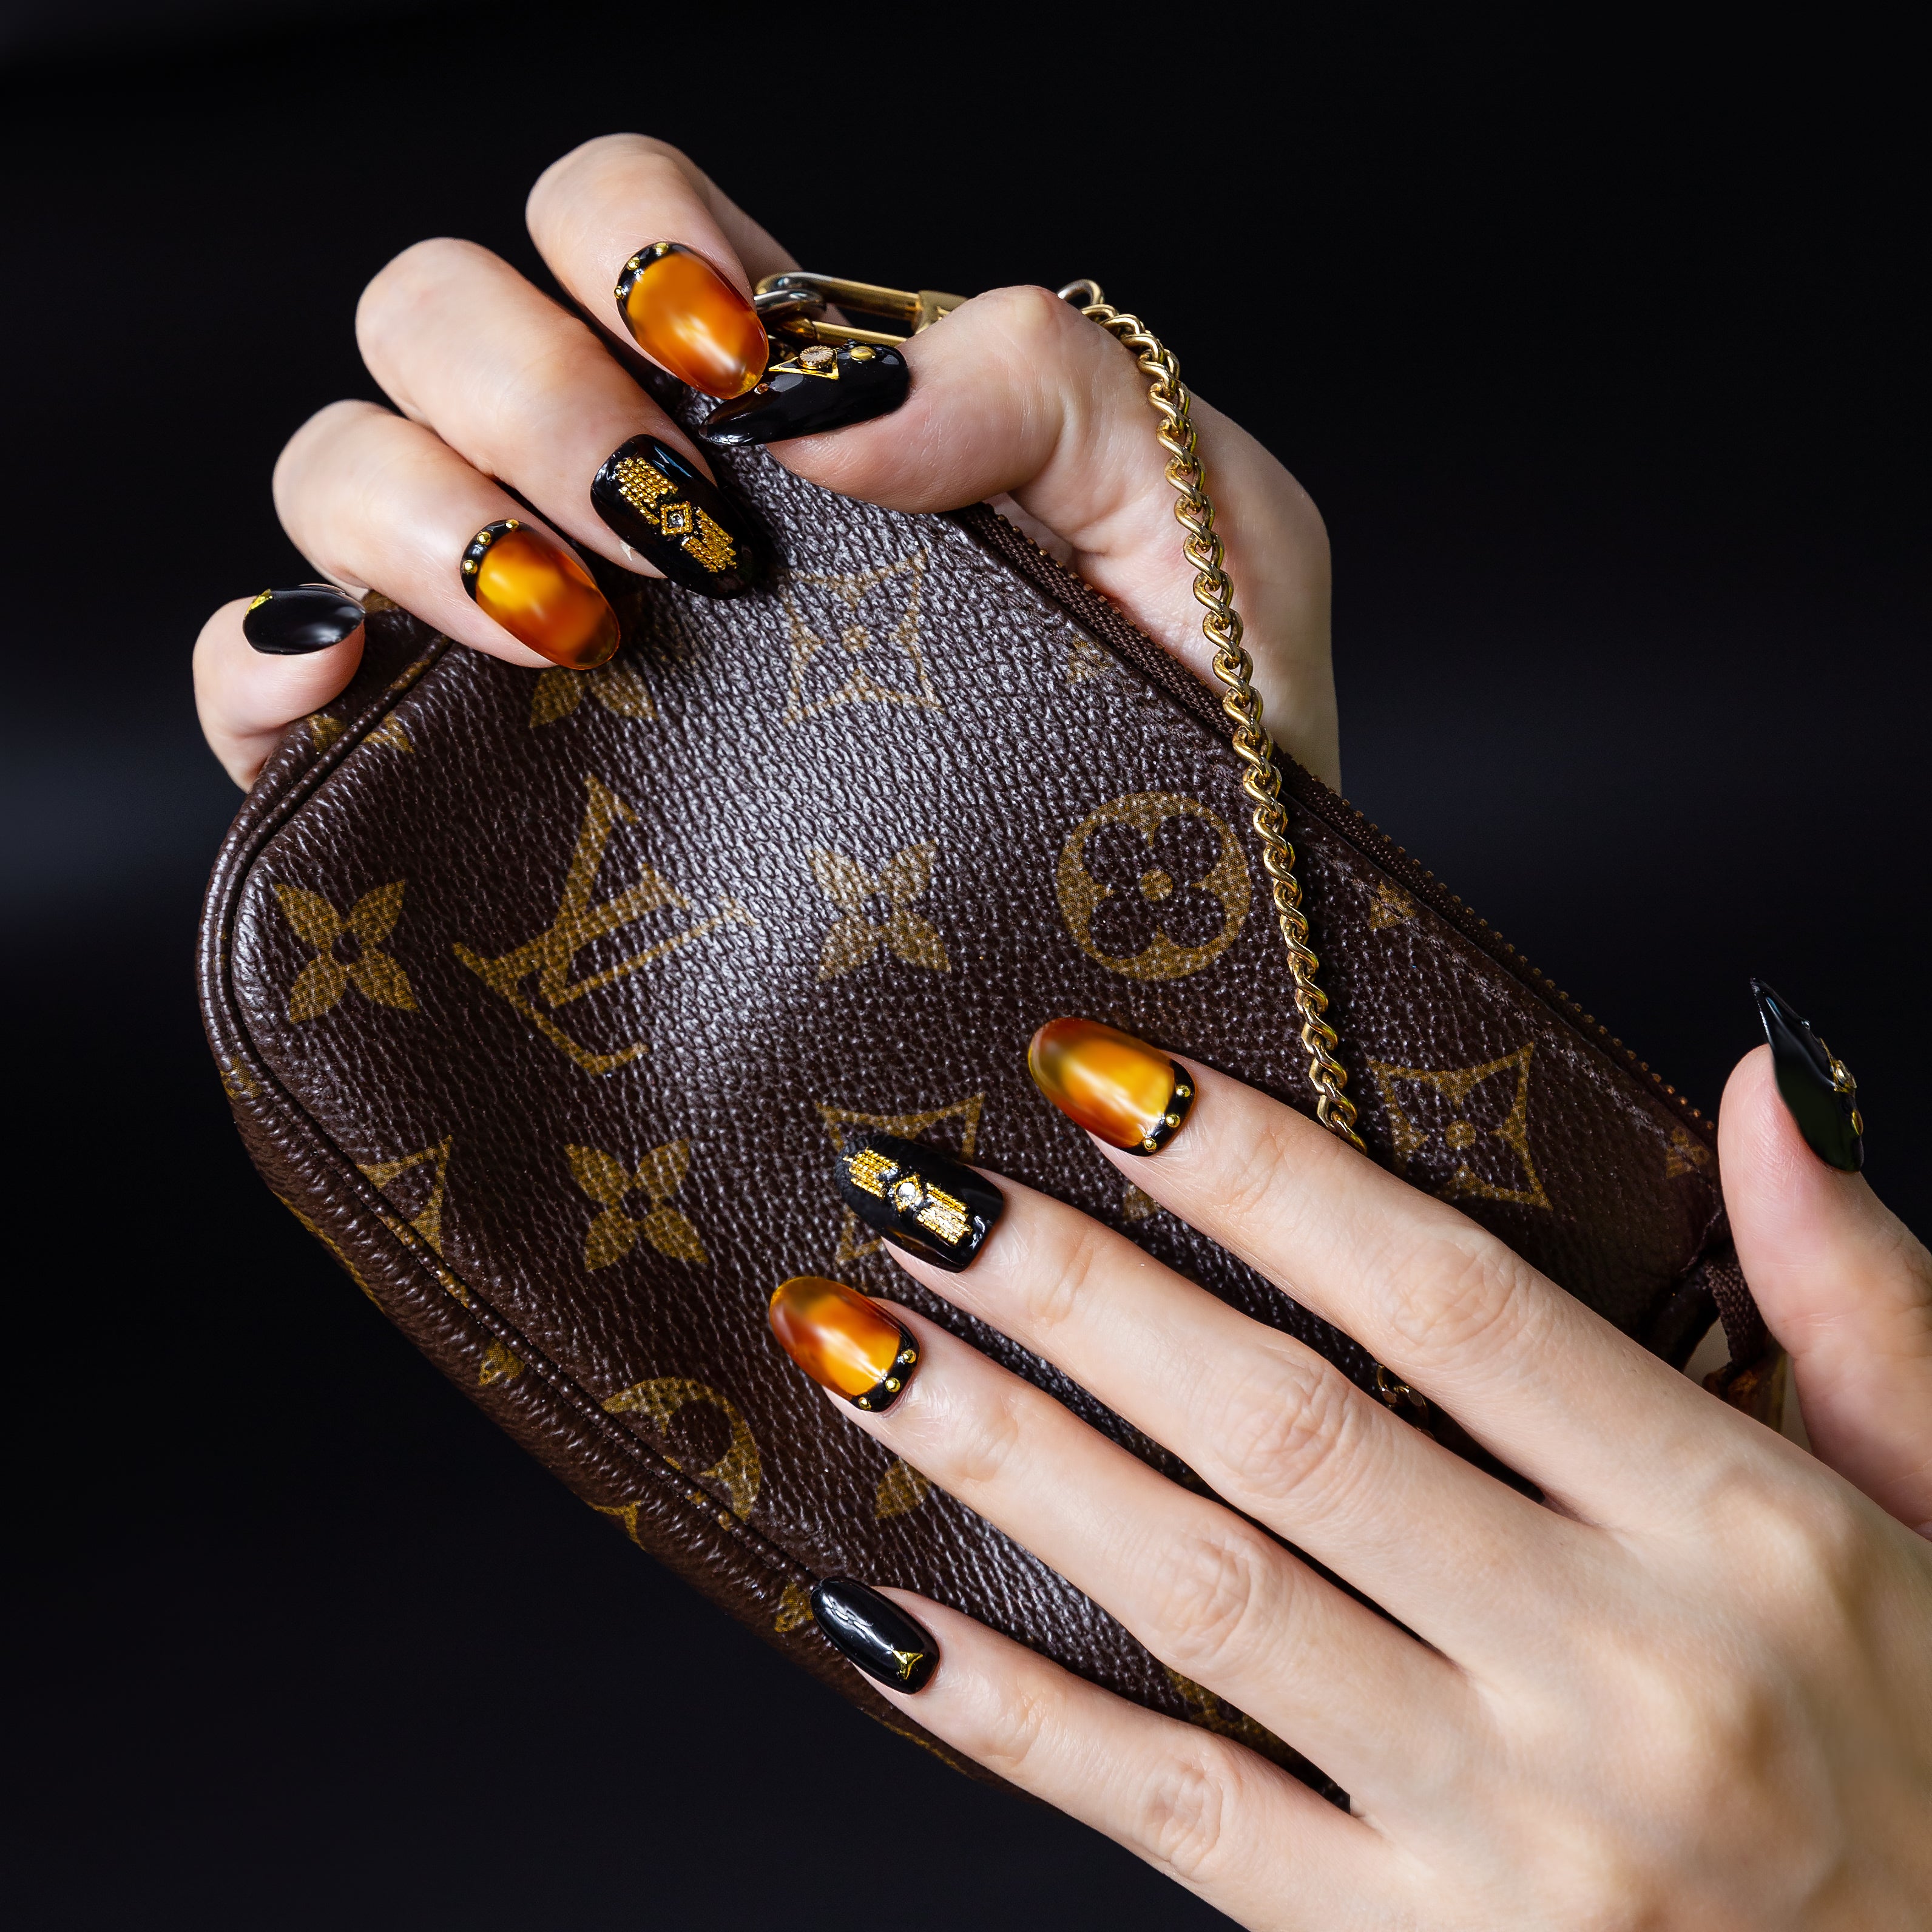 Black Amber - Press on Nails – Bliss and Beyond USA